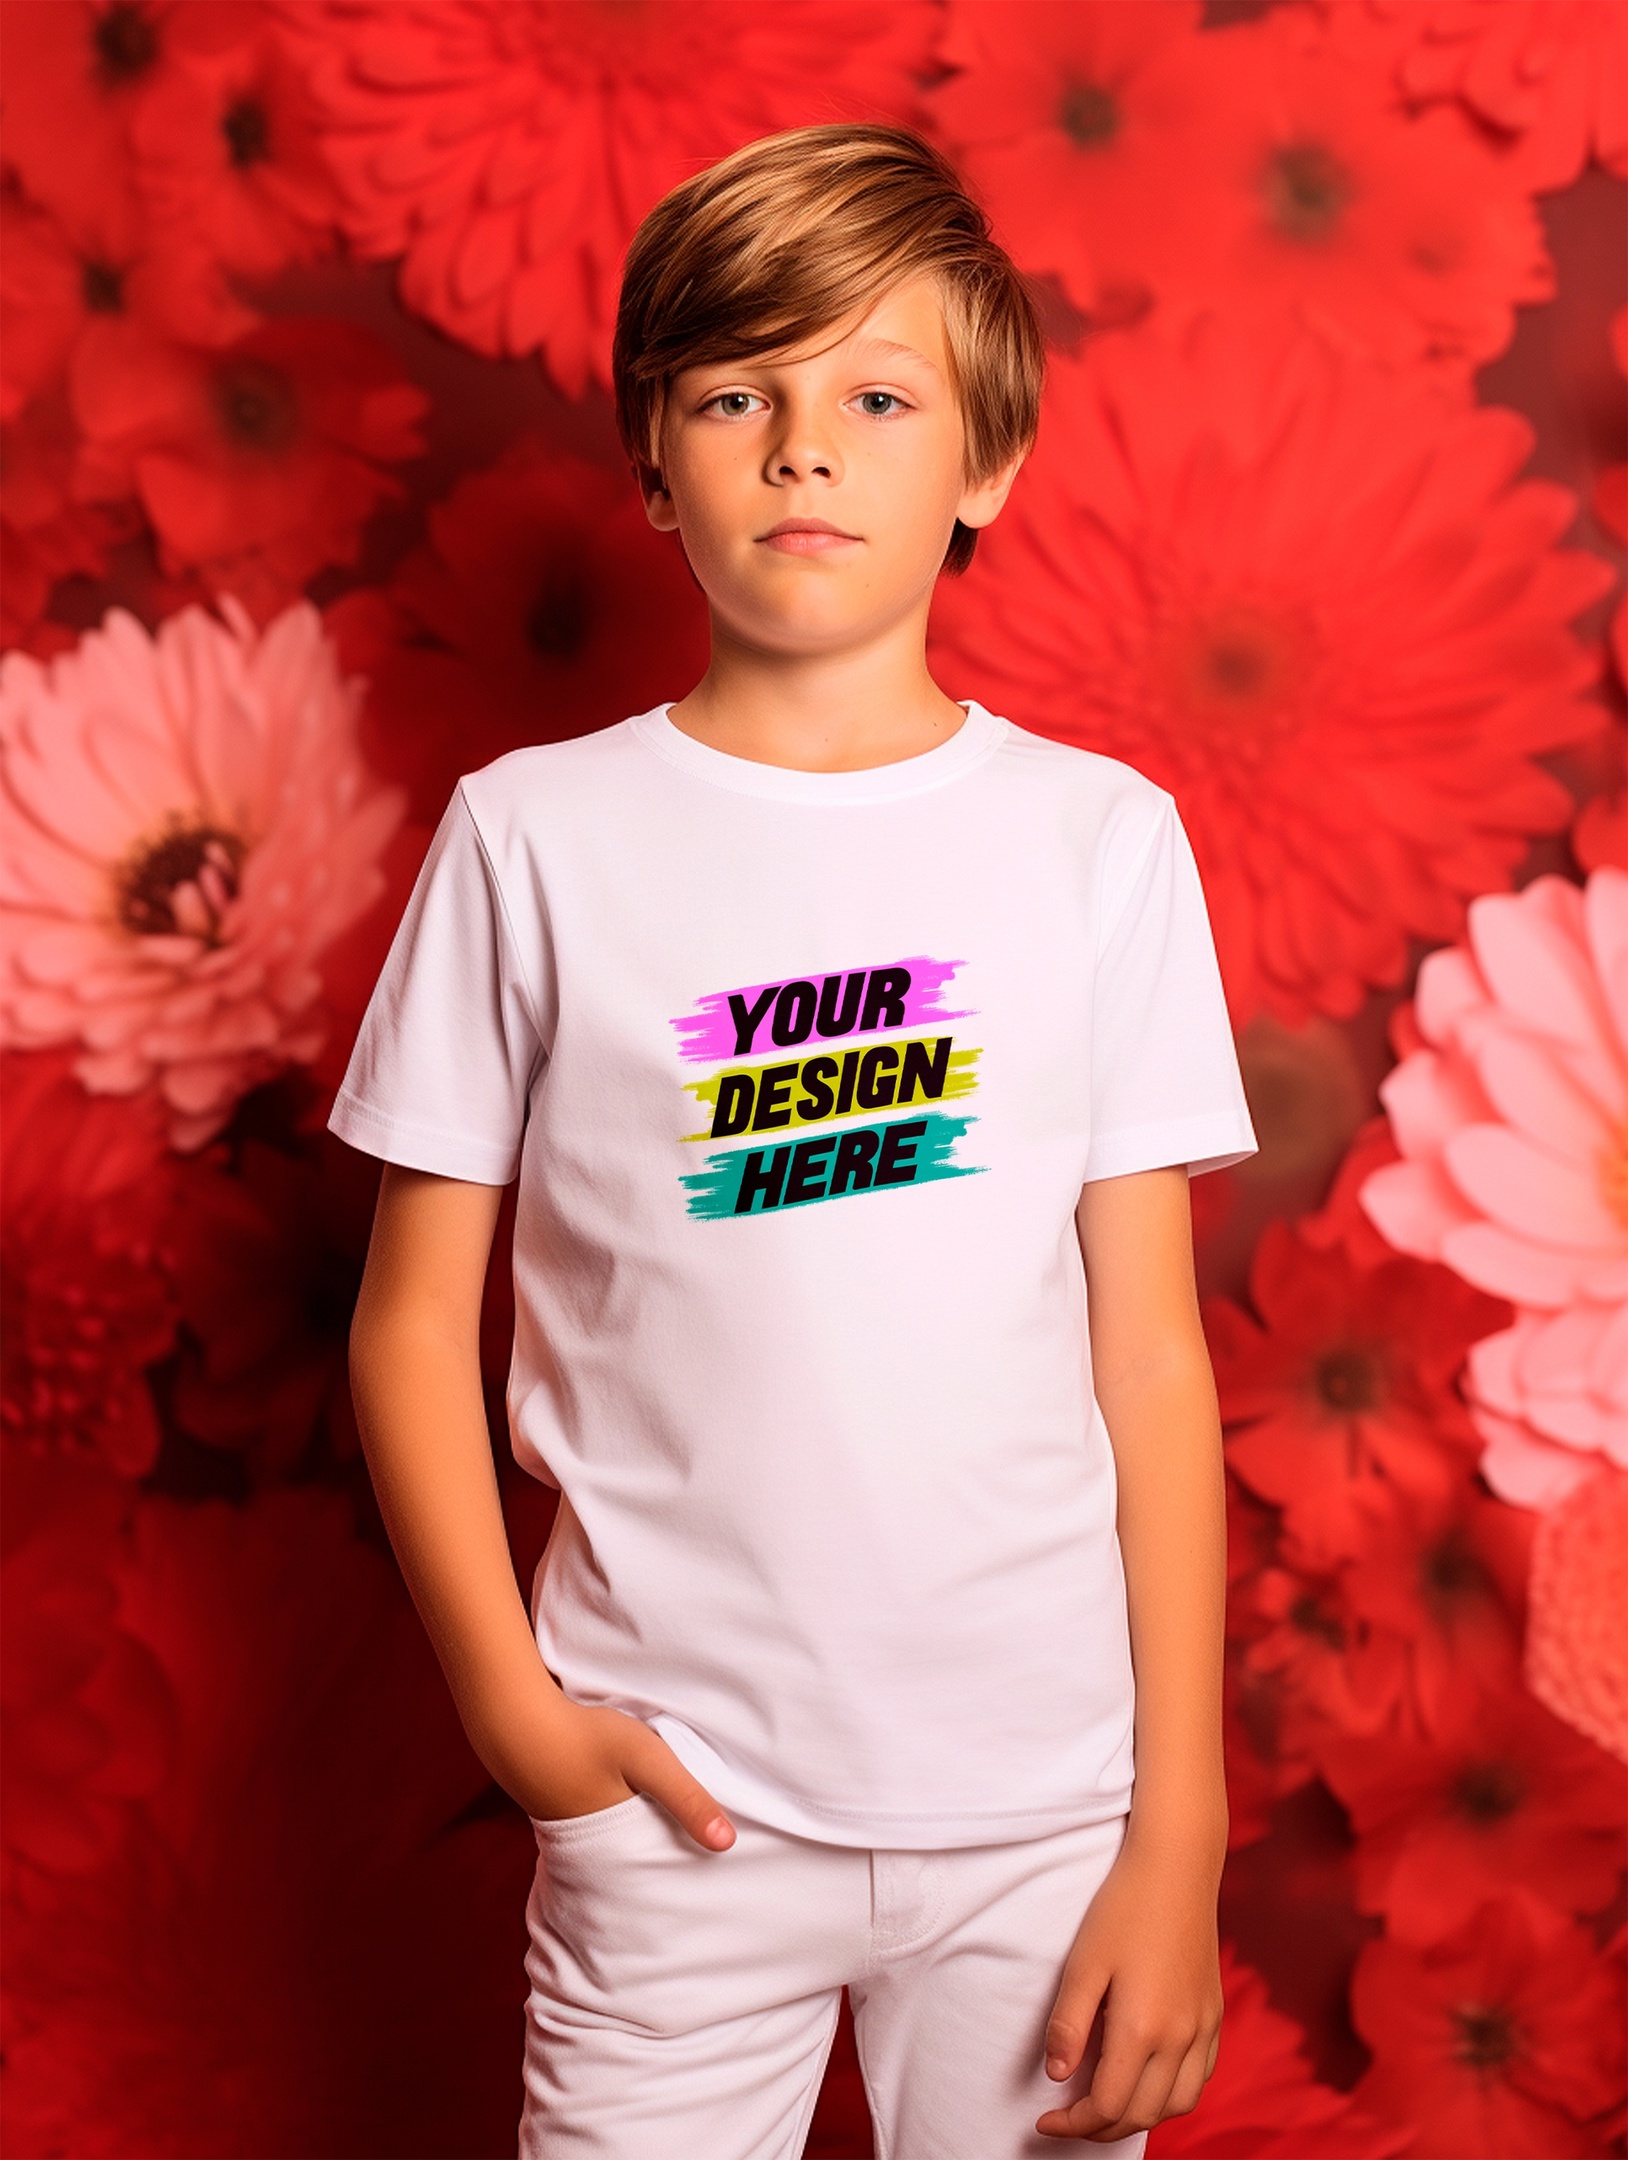 High quality children's T-shirts mockup in editable PSD format